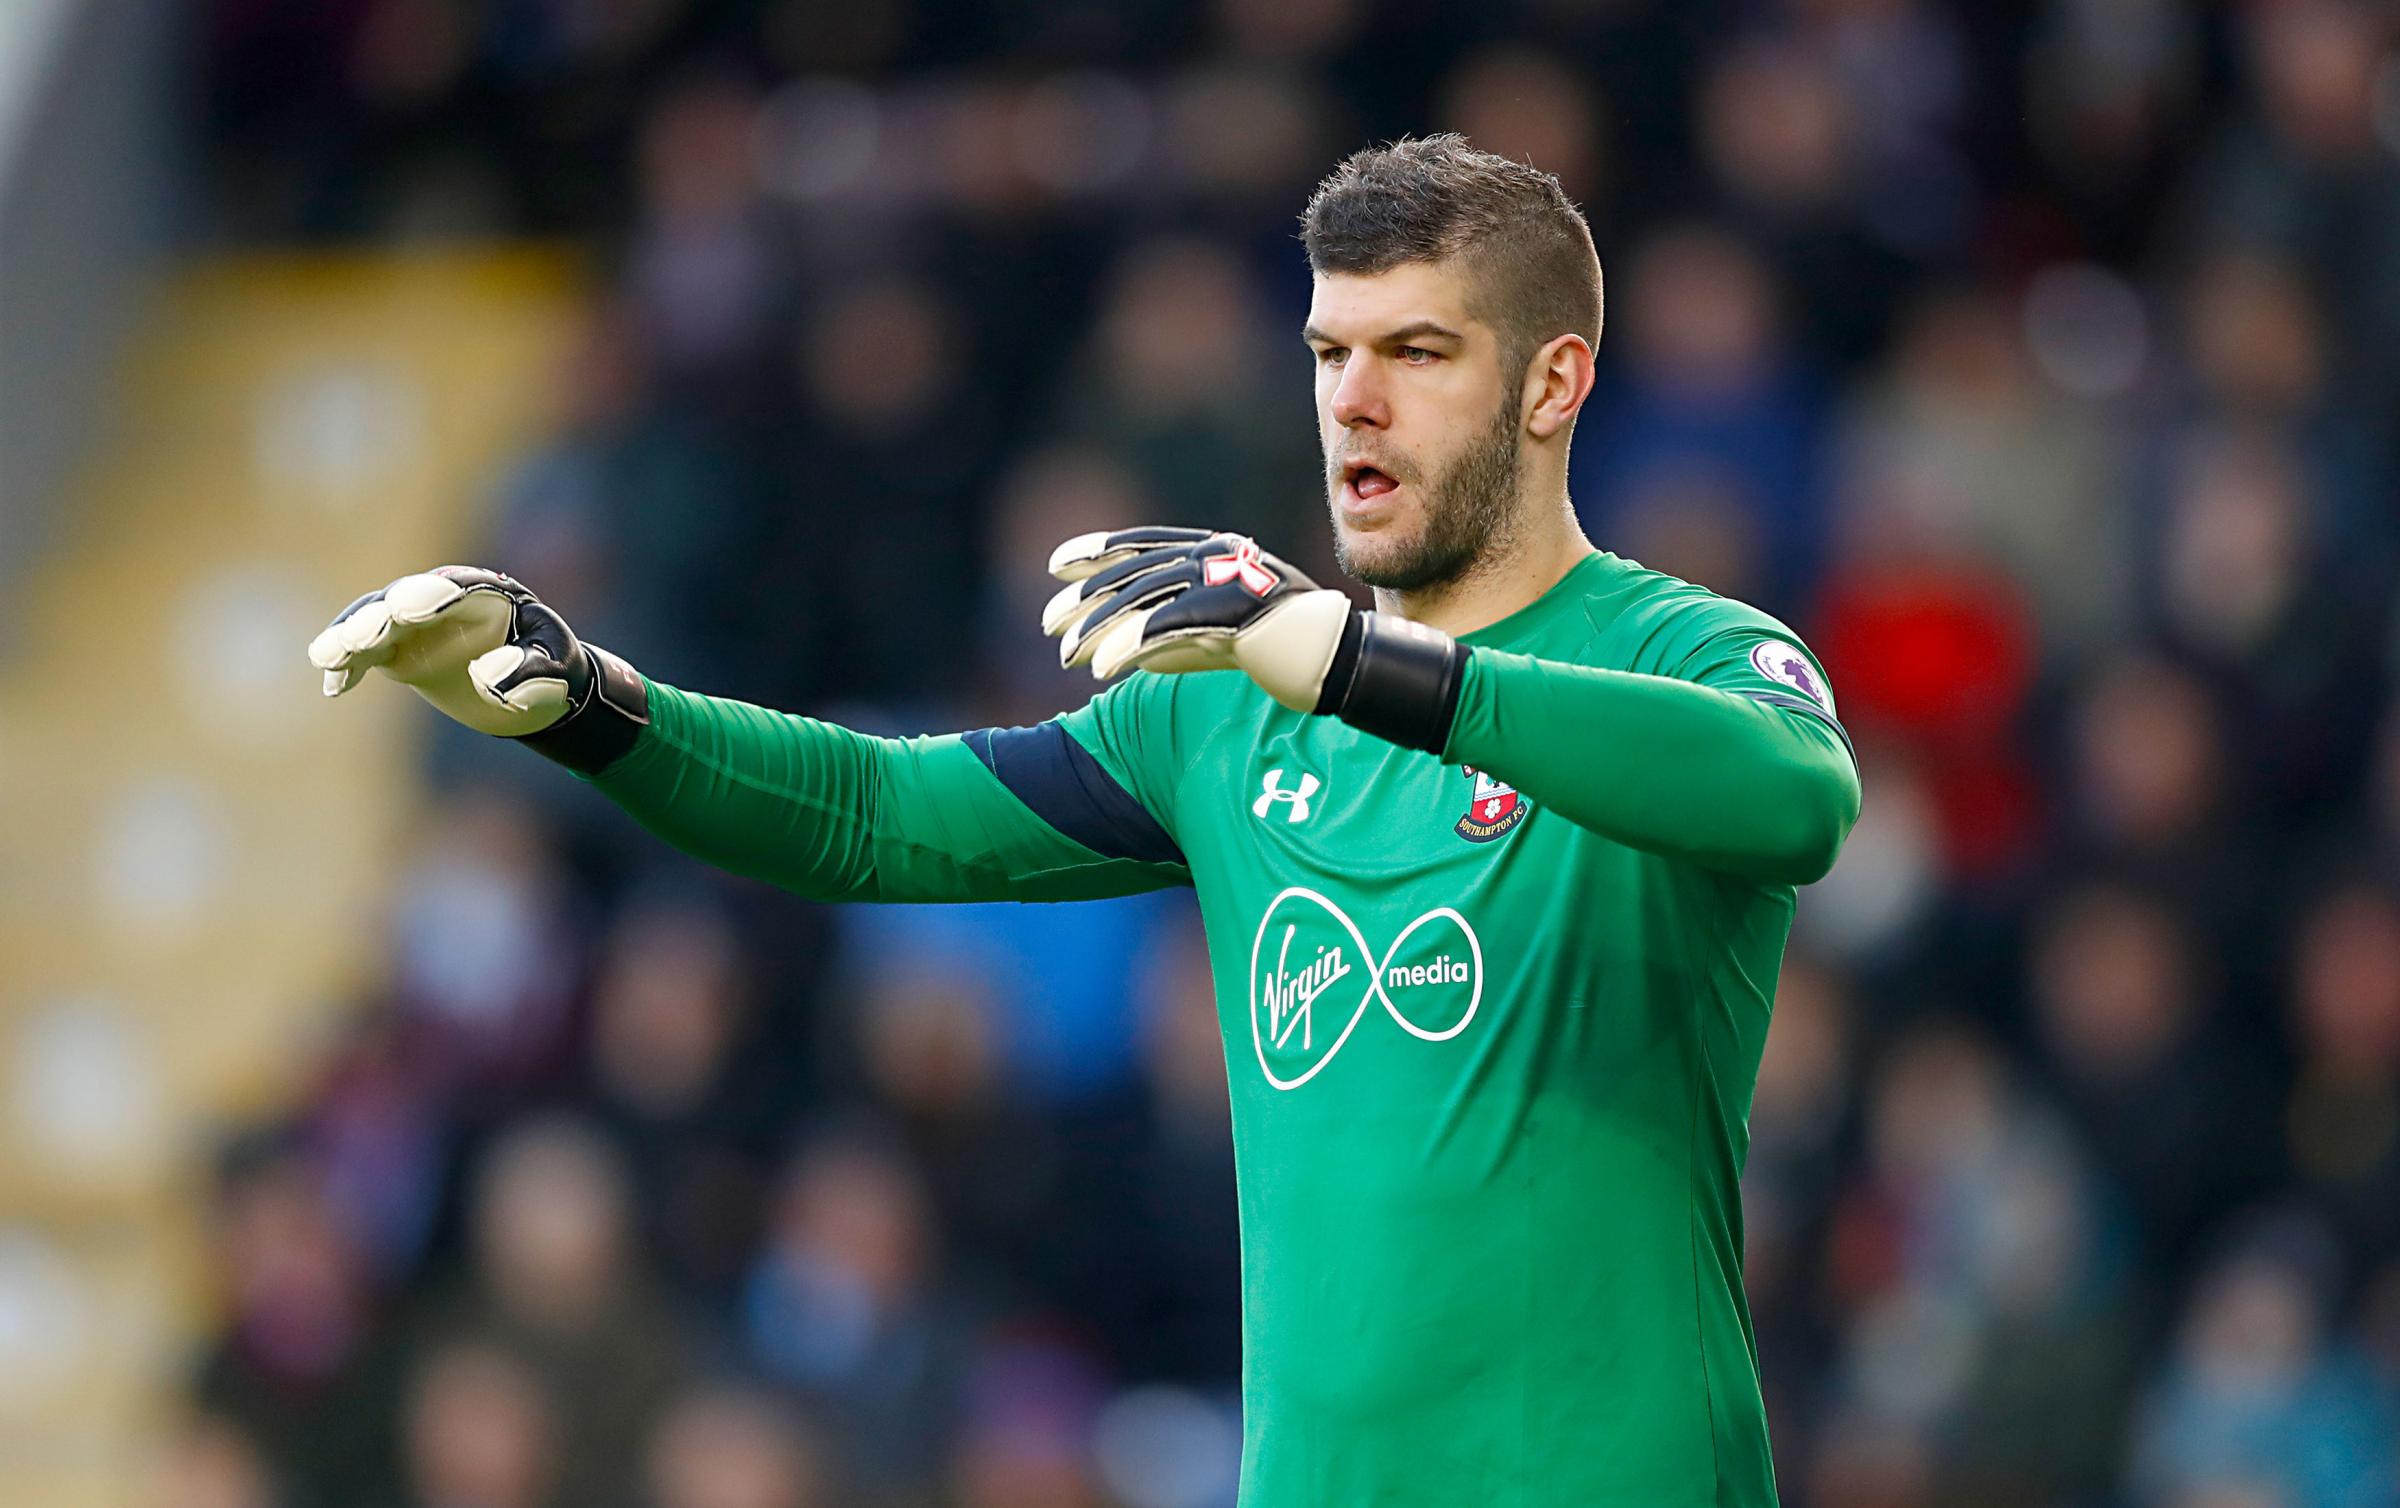 Forster talks about his form this season - and tries to forget Palace howler